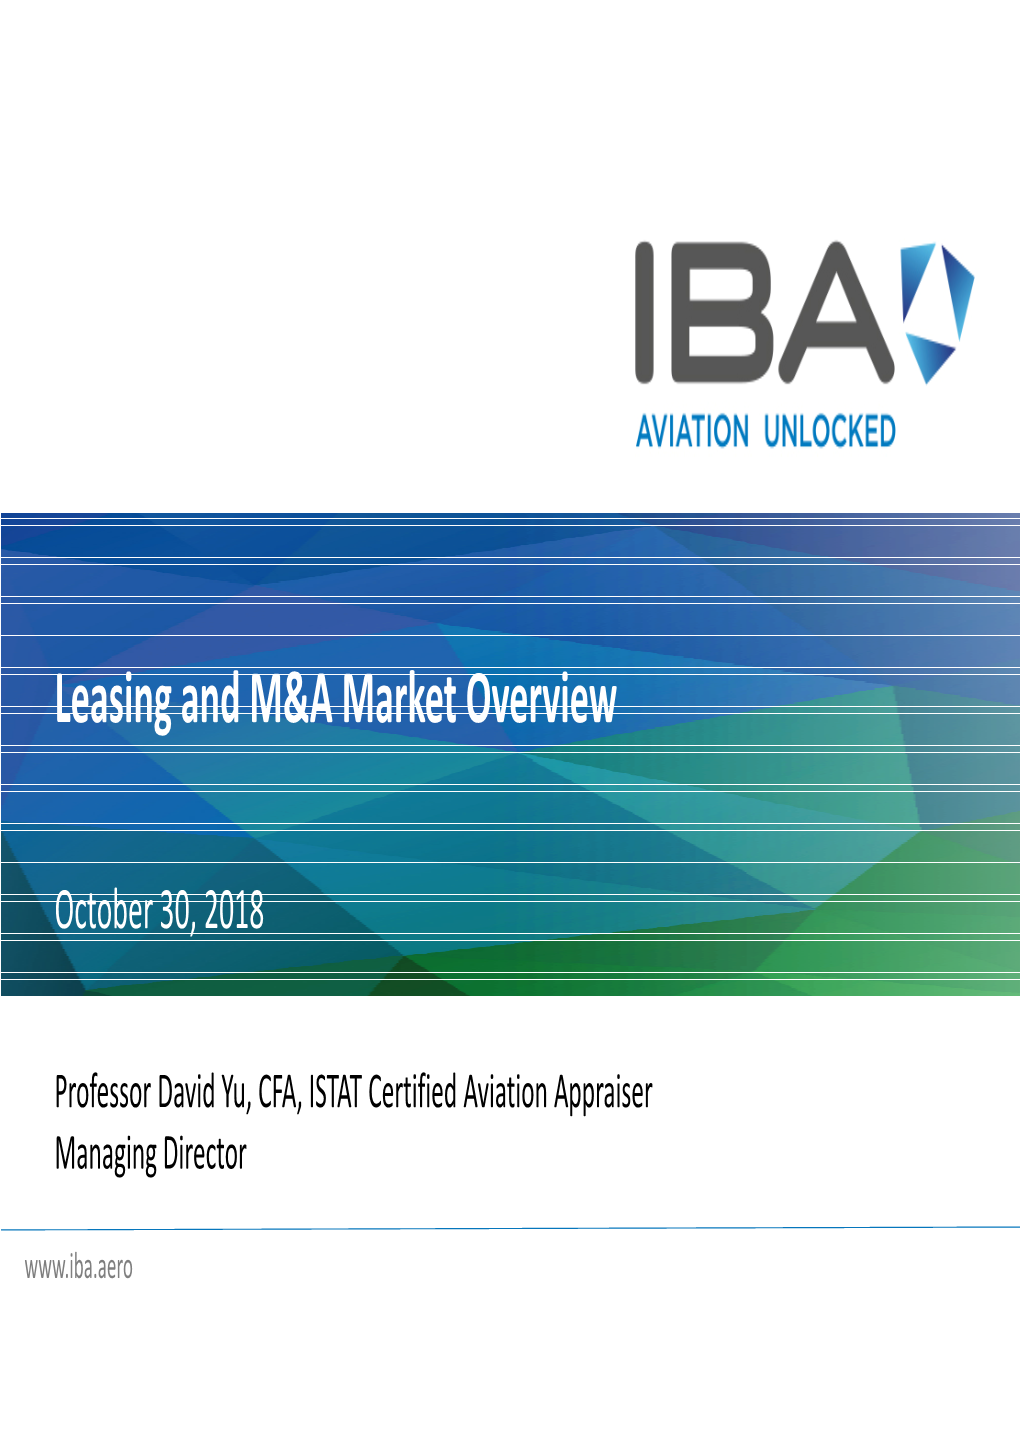 Leasing and M&A Market Overview